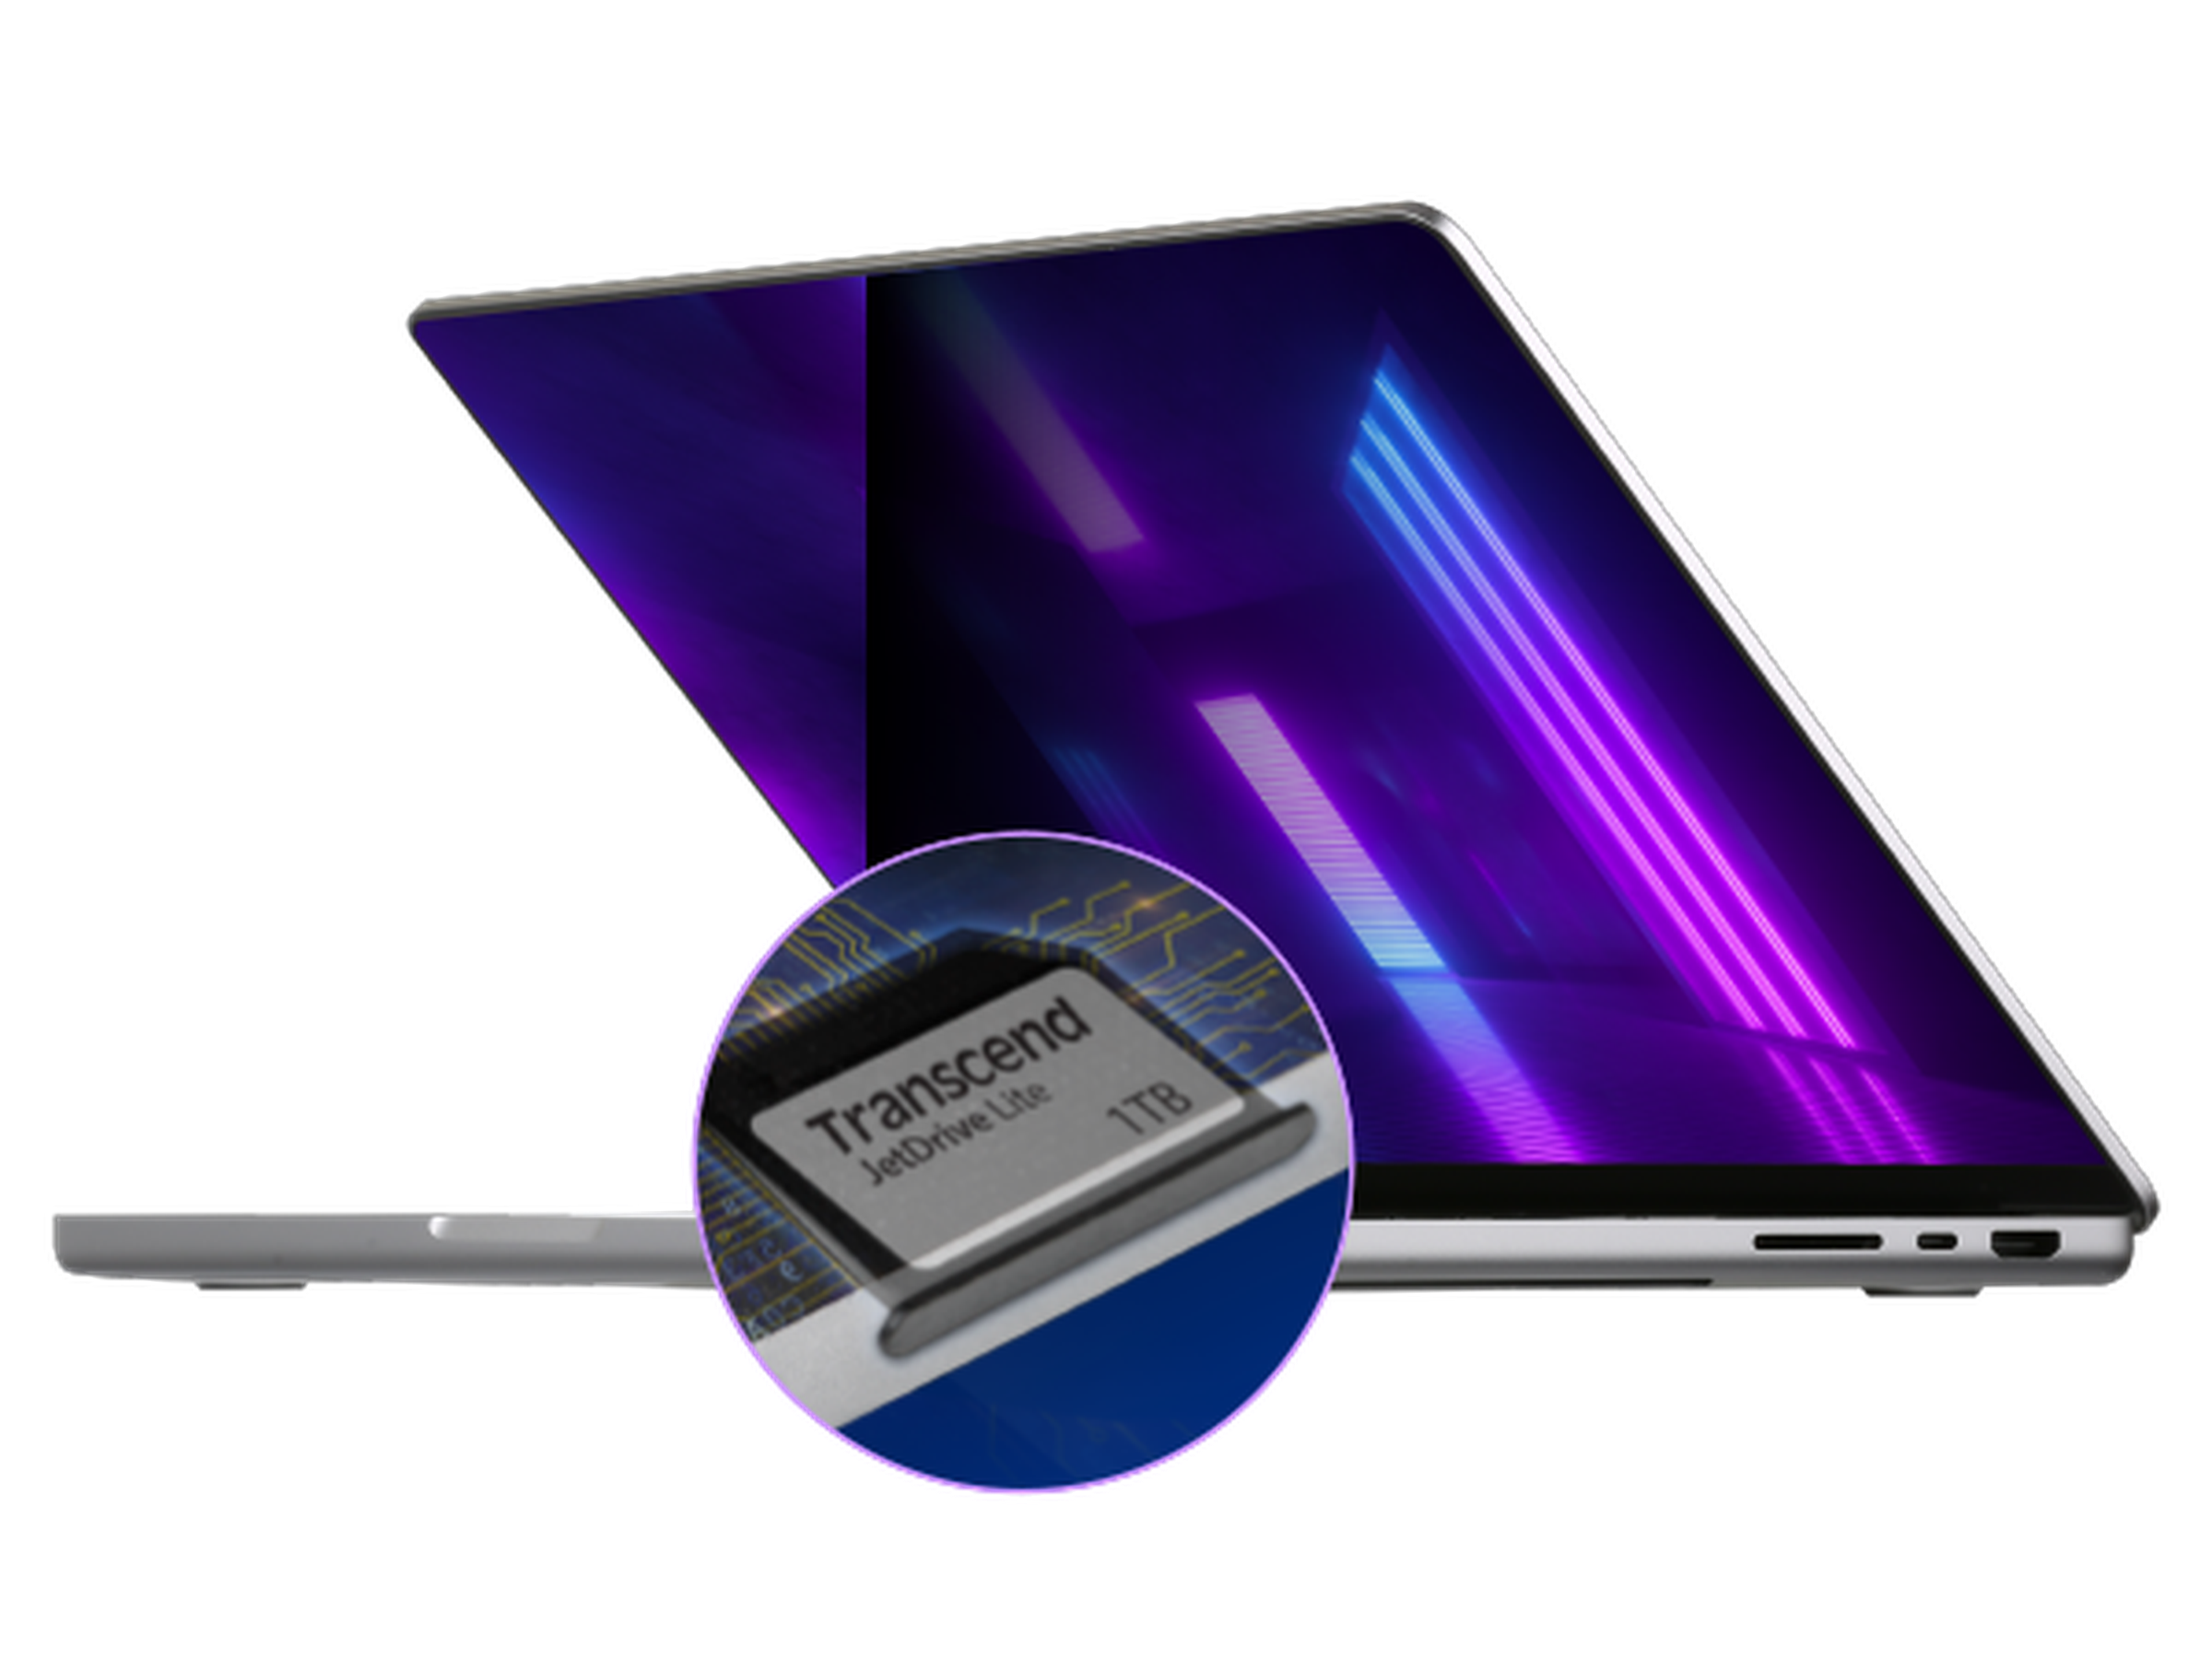 A MacBook Pro seen from the side with a neon purple background on the screen half open on a white background. Overtop is a small close-up of a 1TB Transcend JetDrive lite.